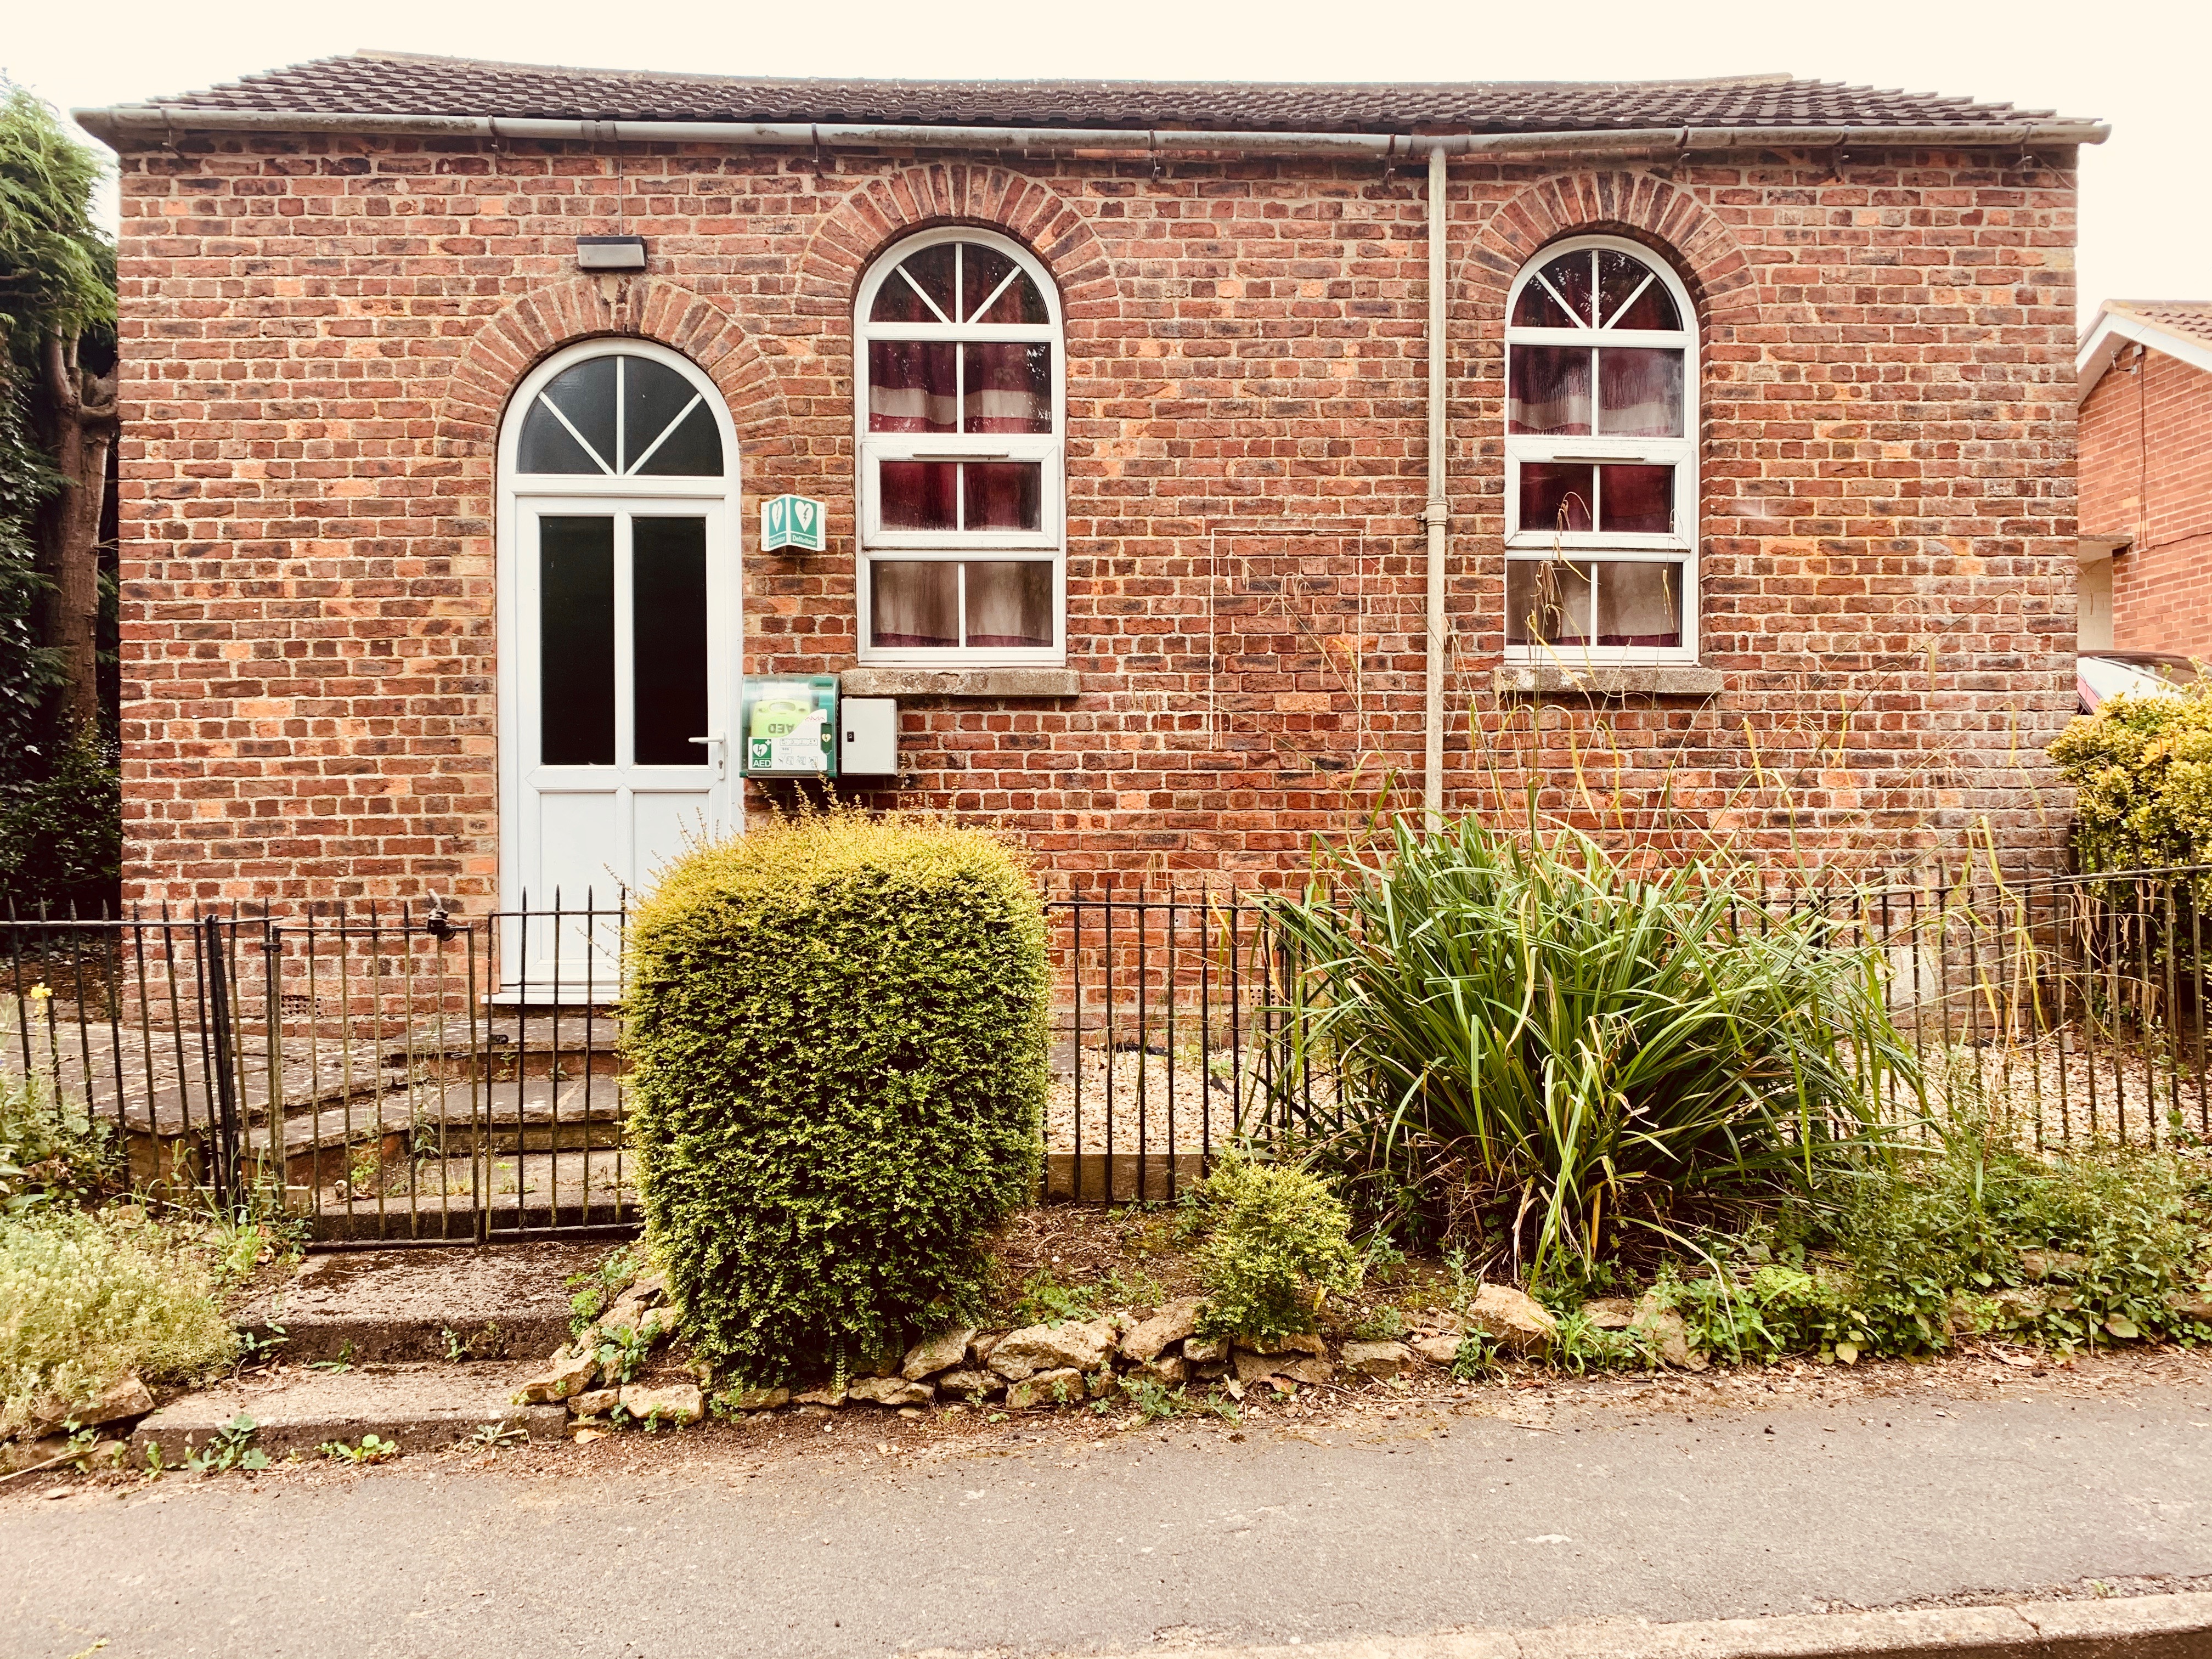 This picture shows the village hall